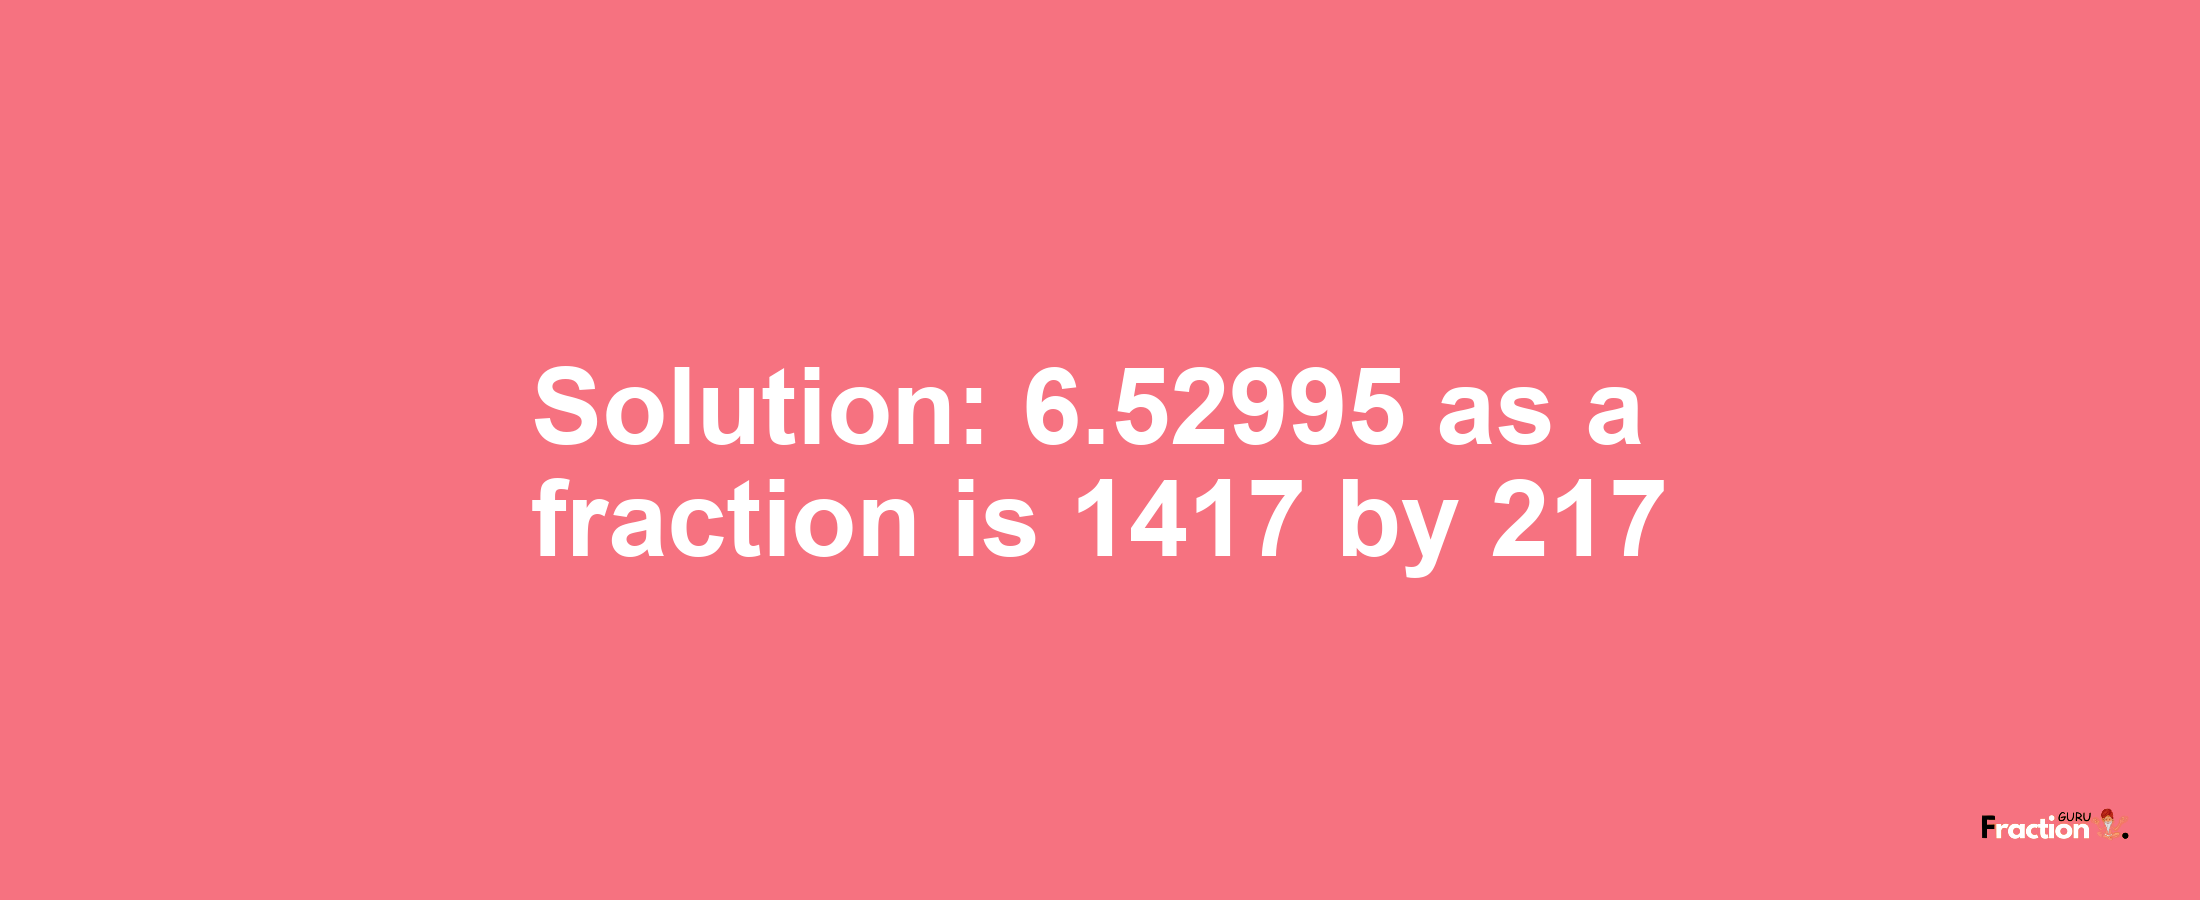 Solution:6.52995 as a fraction is 1417/217